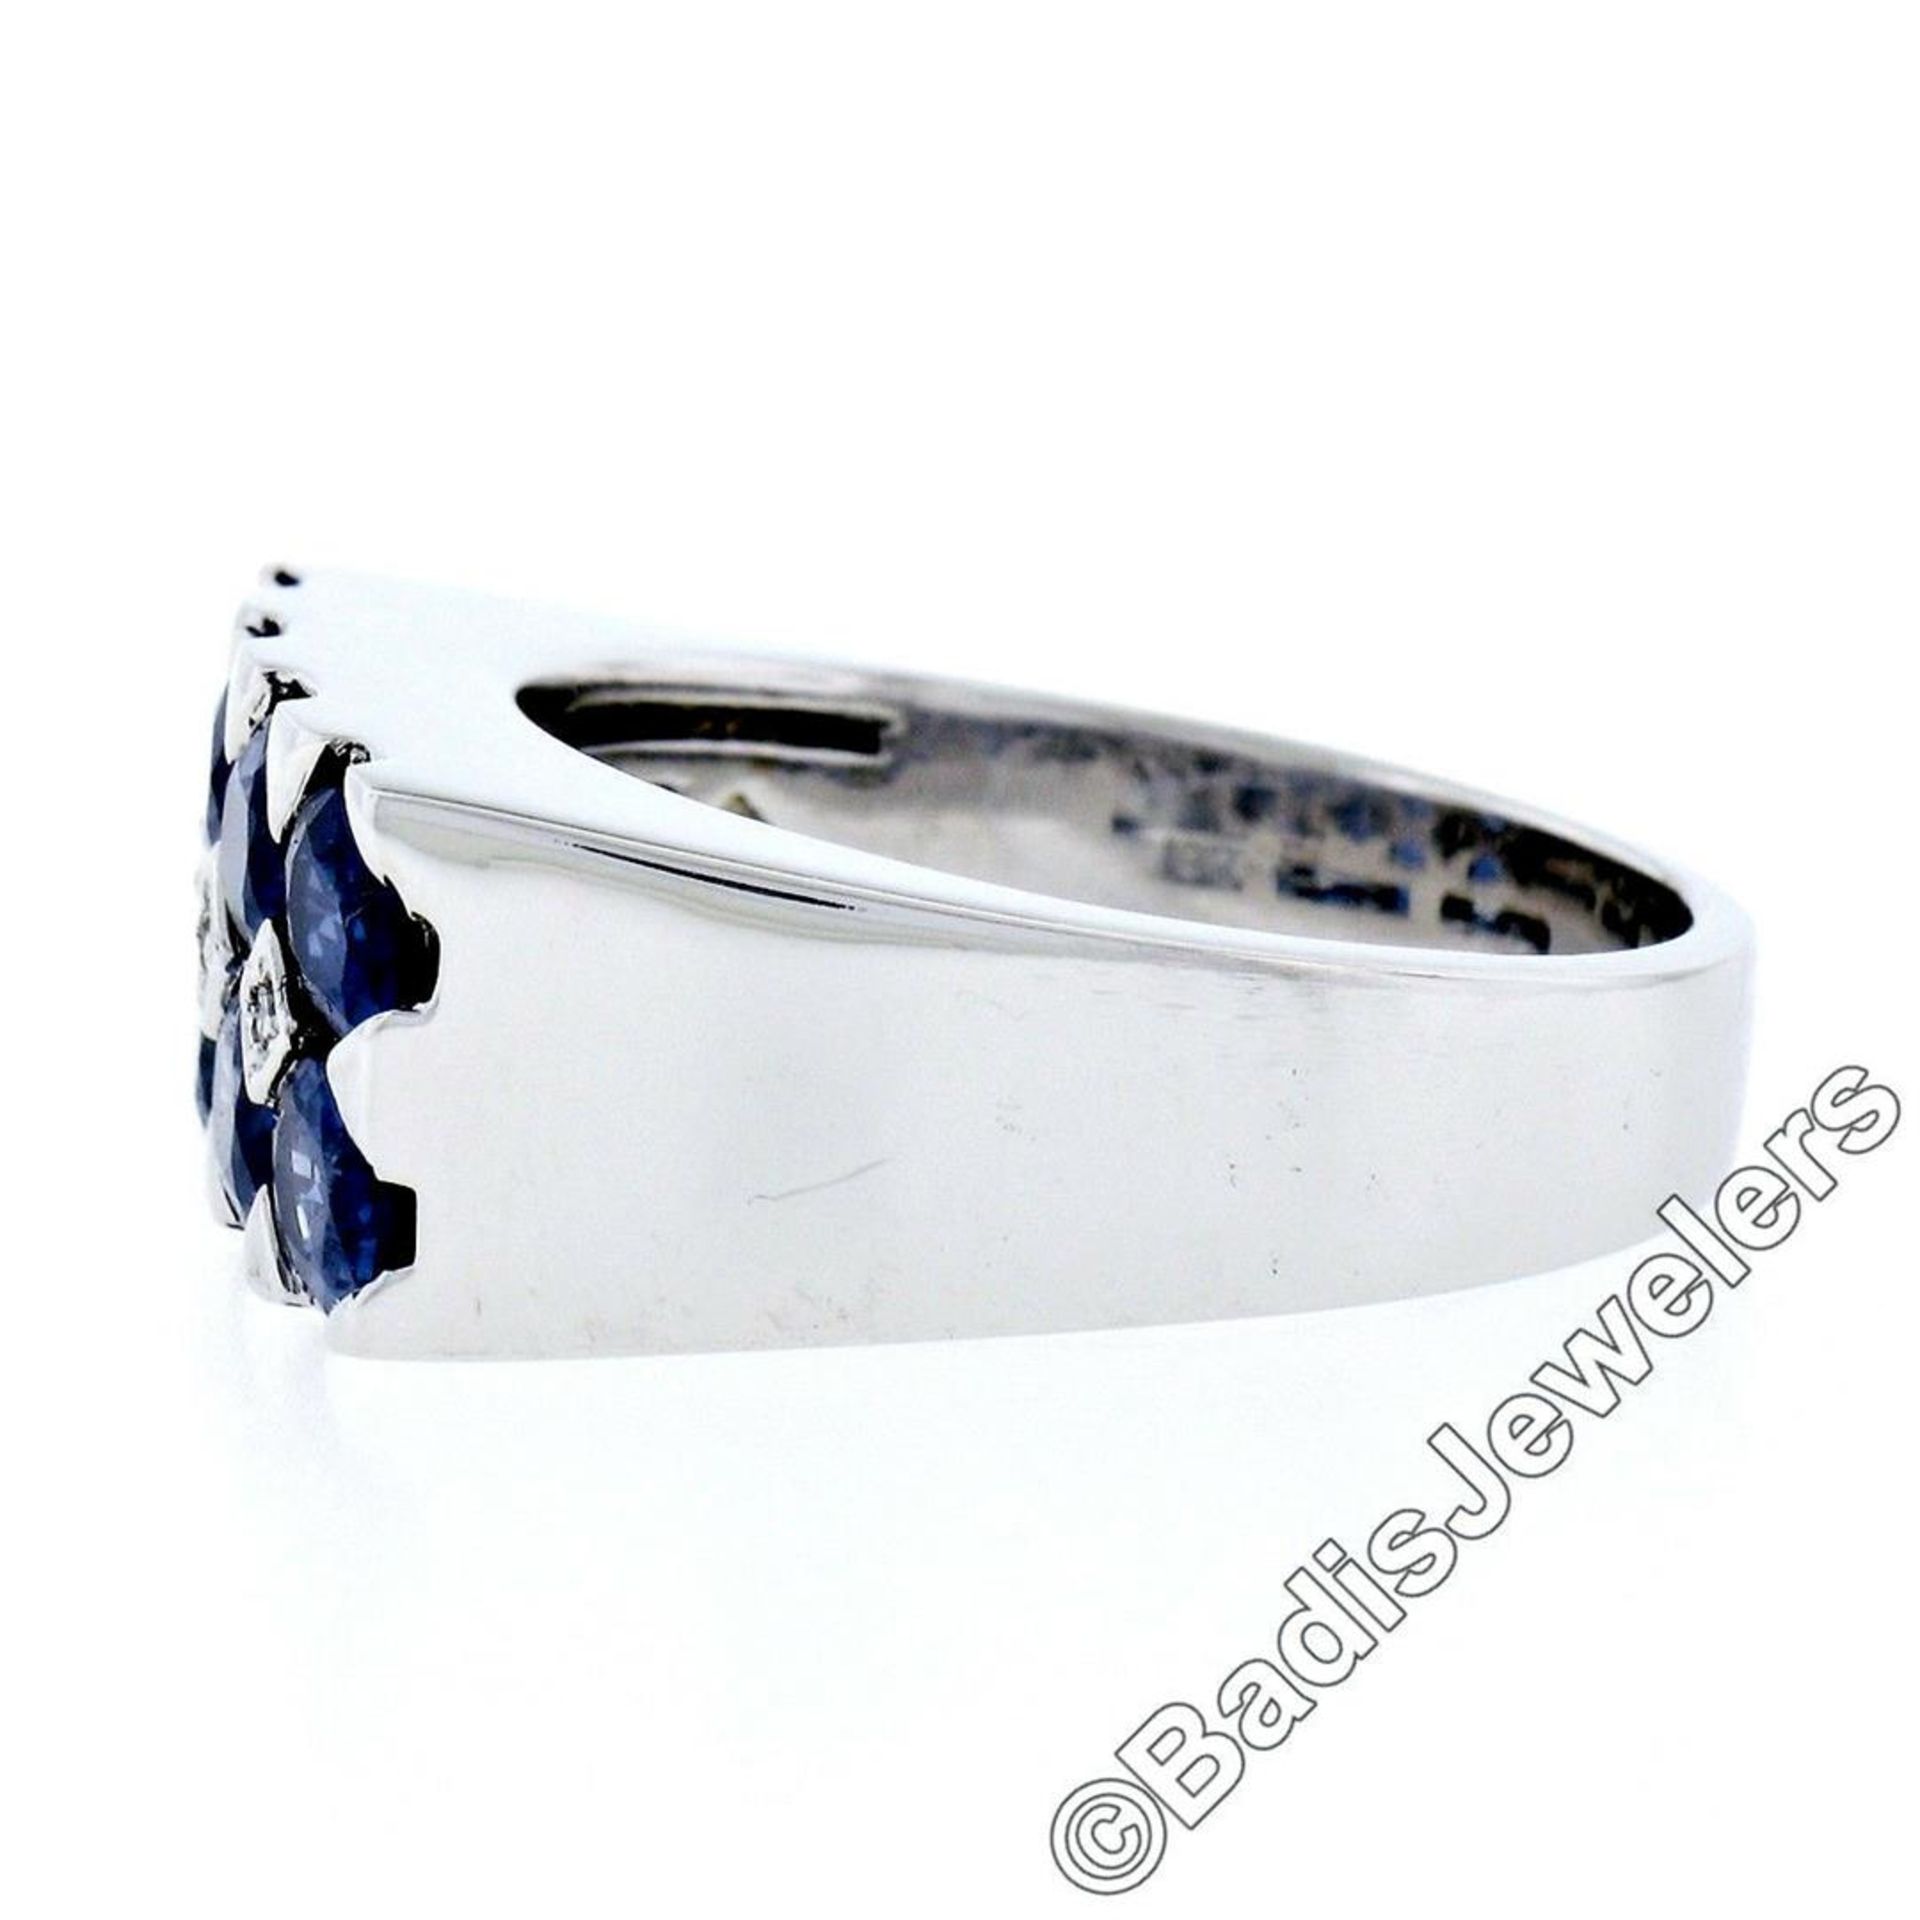 18kt White Gold 4.03ctw Dual Row Oval Cut Sapphire & Diamond Band Ring - Image 7 of 9